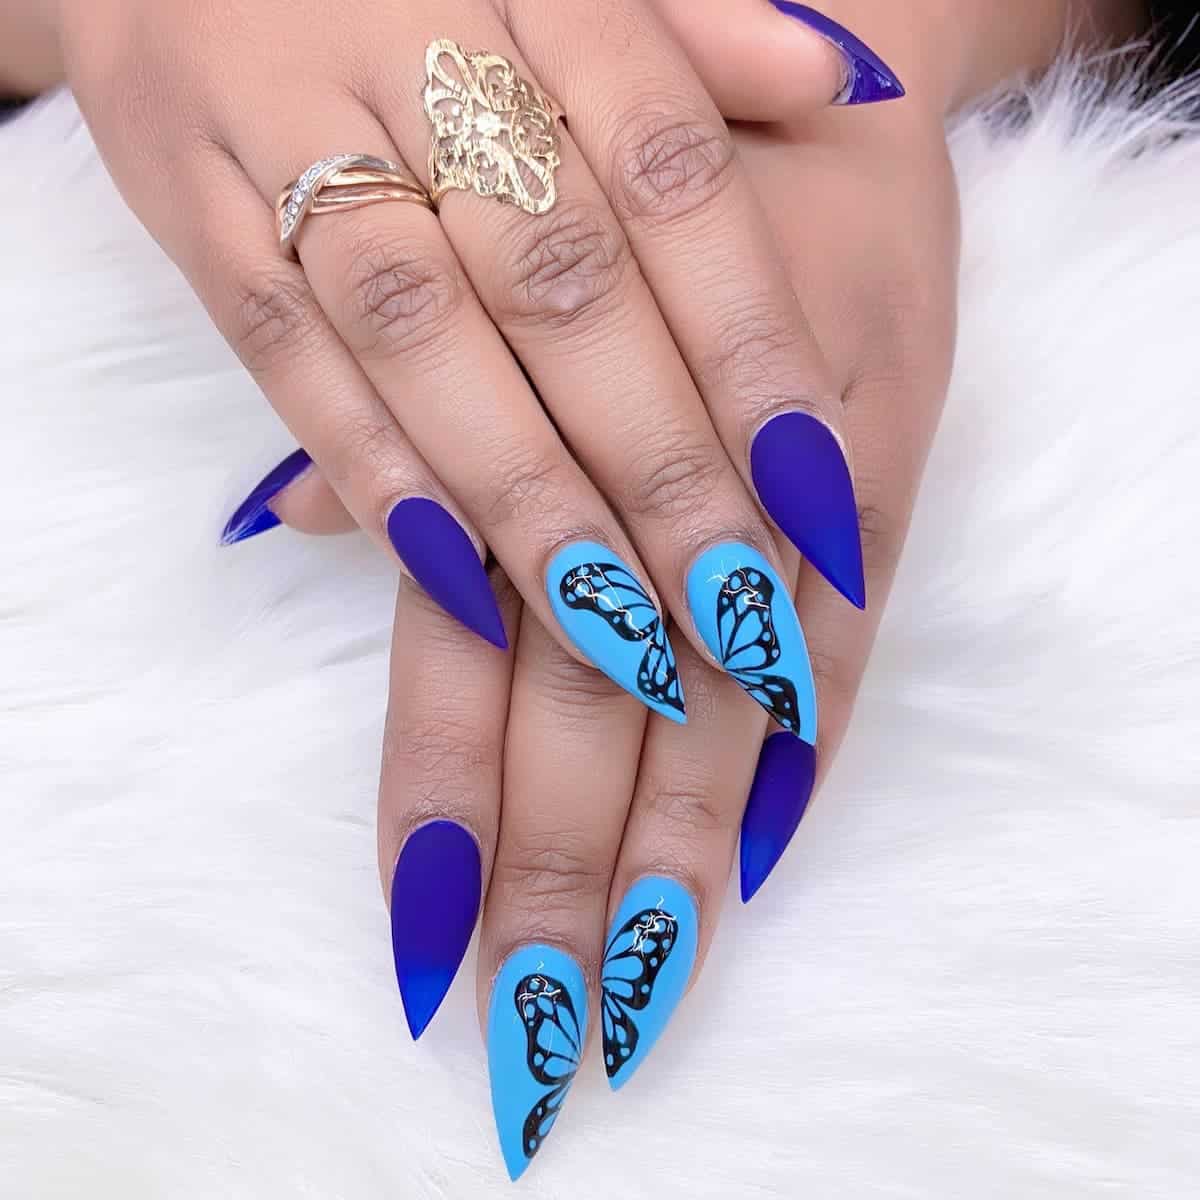 35 Short Stiletto Nails With Classy and Trendy Designs